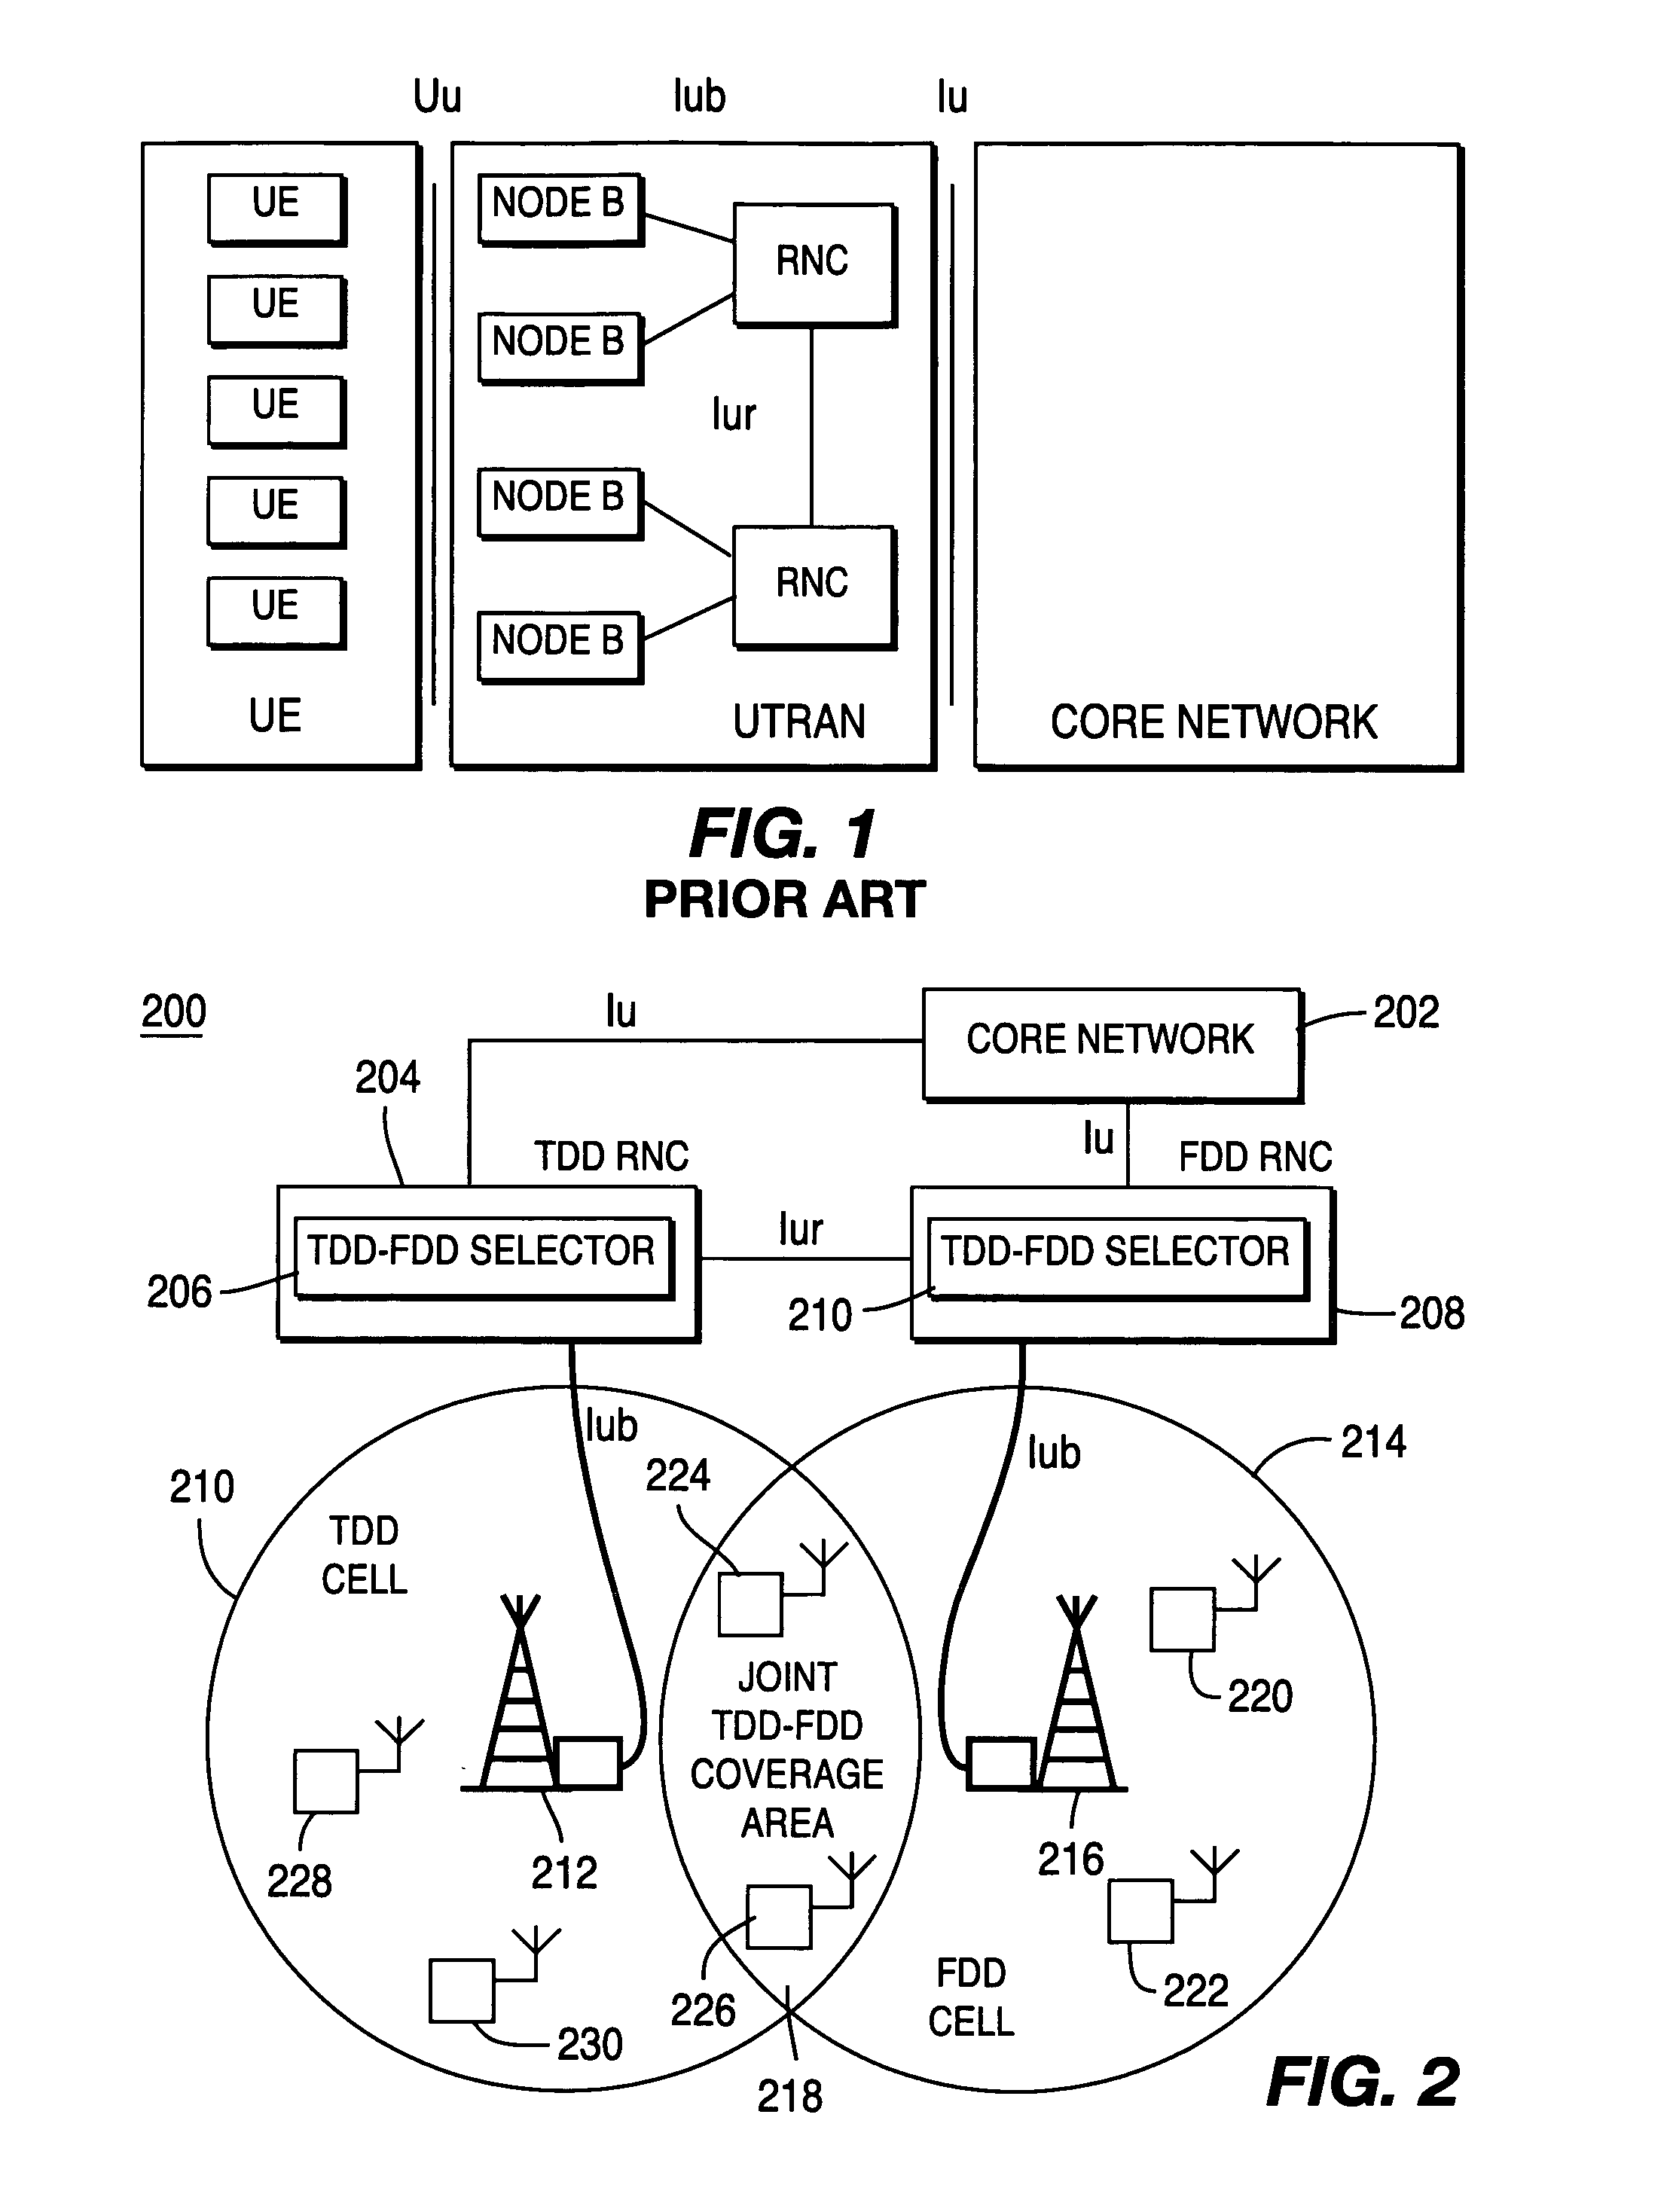 Method and system for integrating resource allocation between time division duplex and frequency division duplex in wireless communication systems